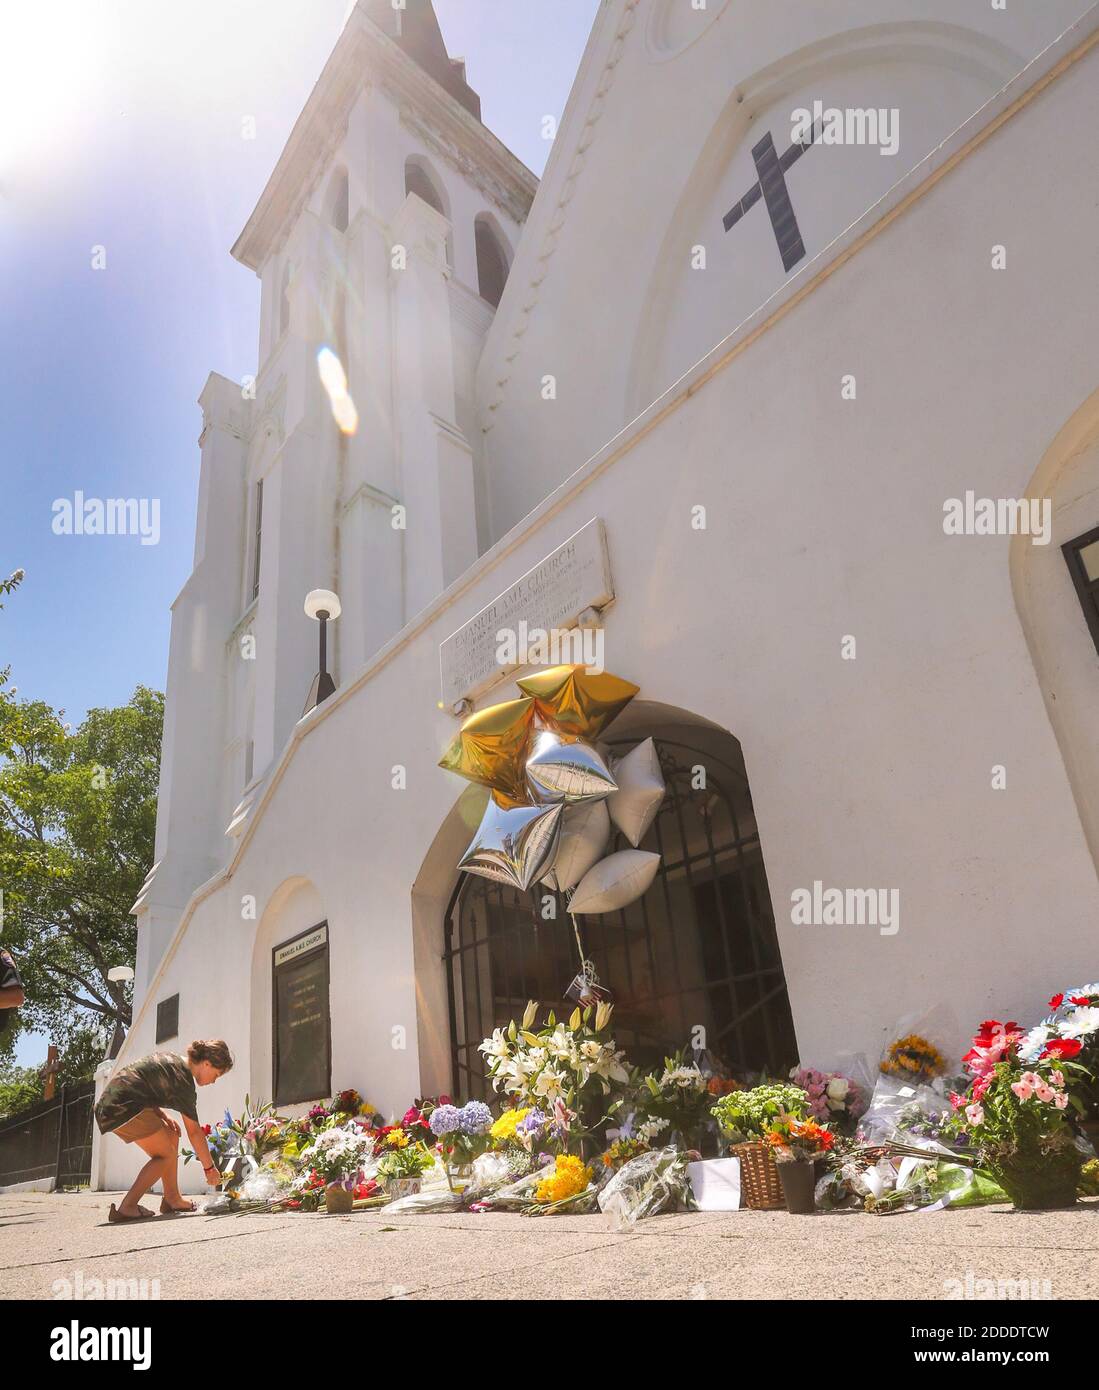 NO FILM, NO VIDEO, NO TV, NO DOCUMENTARY - A stream of people bring flowers to the front of Emanuel AME Church on June 18, 2015 in Charleston, SC, USA., where nine people were shot to death. Photo by Tim Dominick/The State/TNS/ABACAPRESS.COM Stock Photo